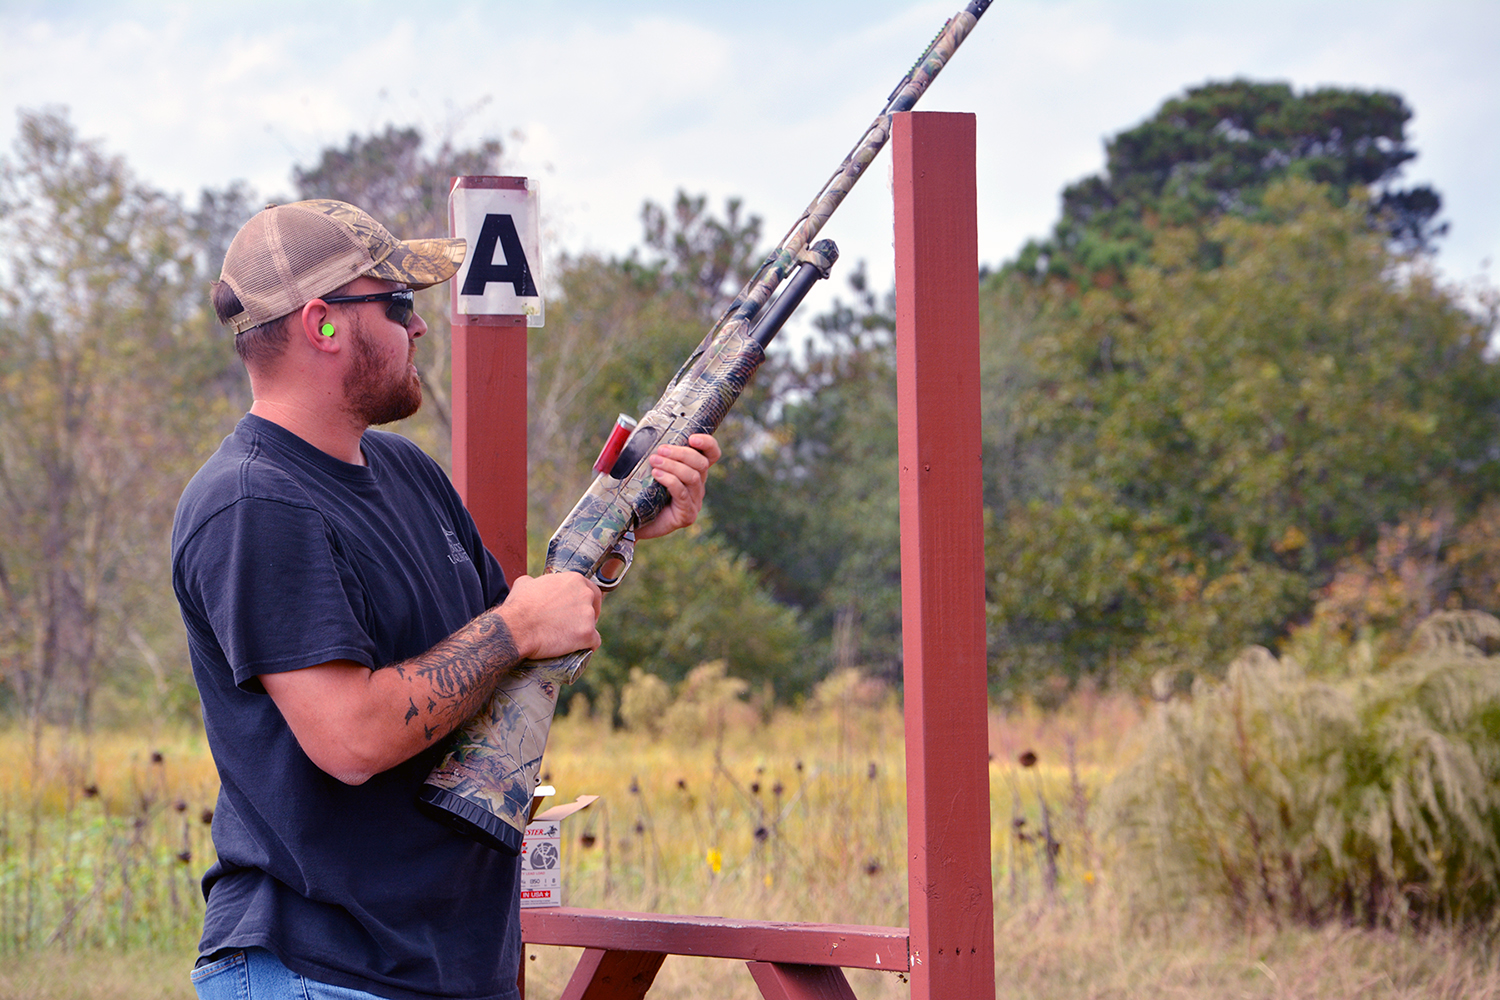 A shooter stands at one of the clay shoot stations.